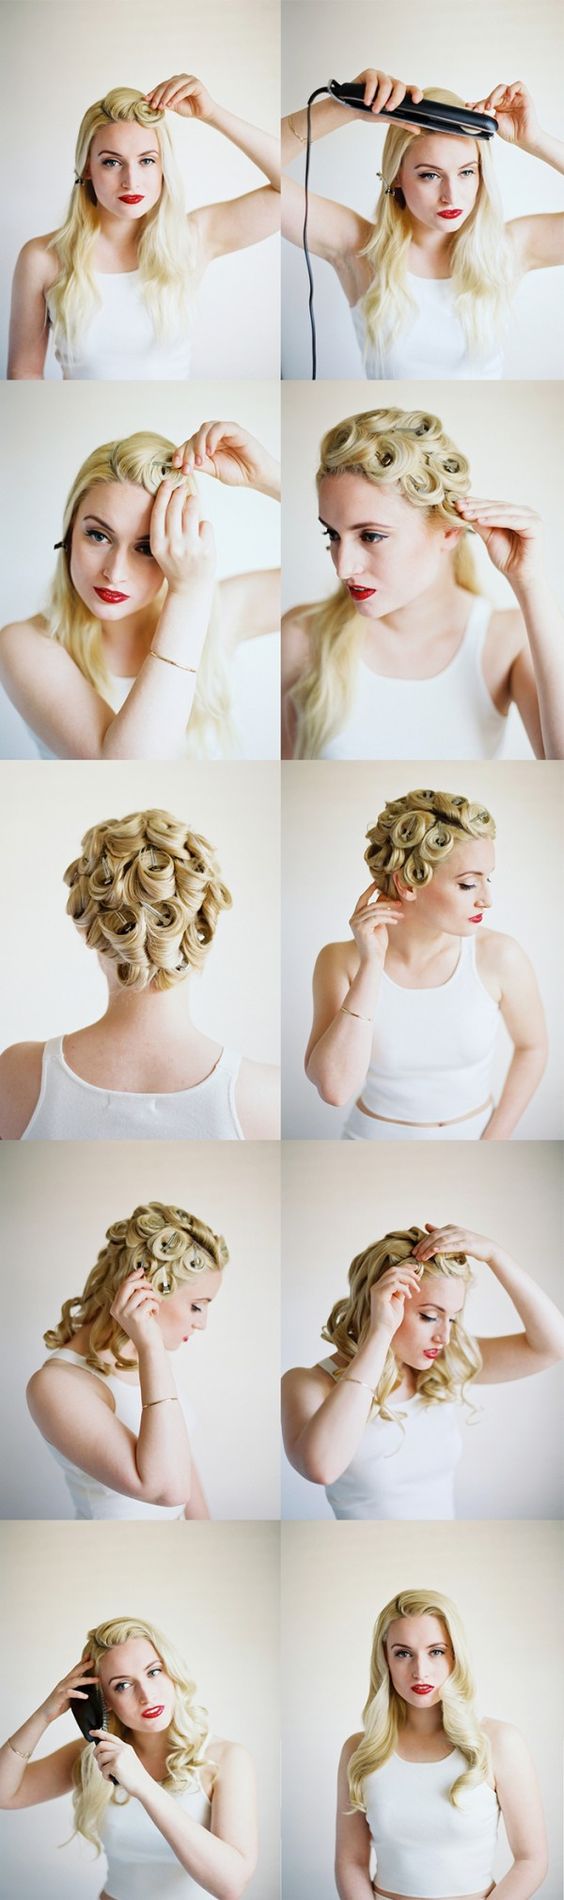 Pin curls tutorials about